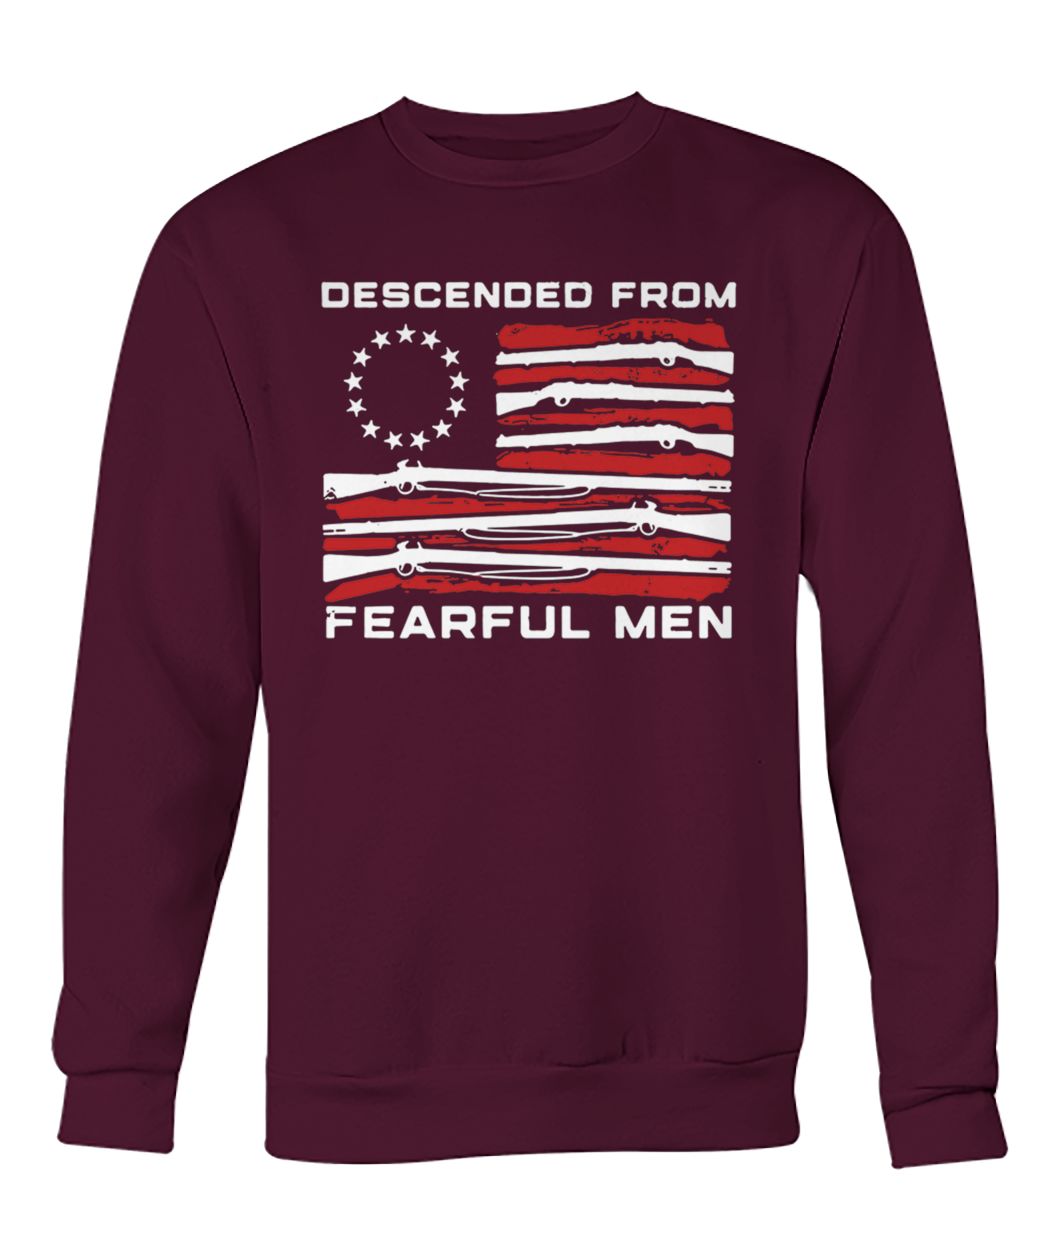 Betsy ross flag descended from fearful men crew neck sweatshirt